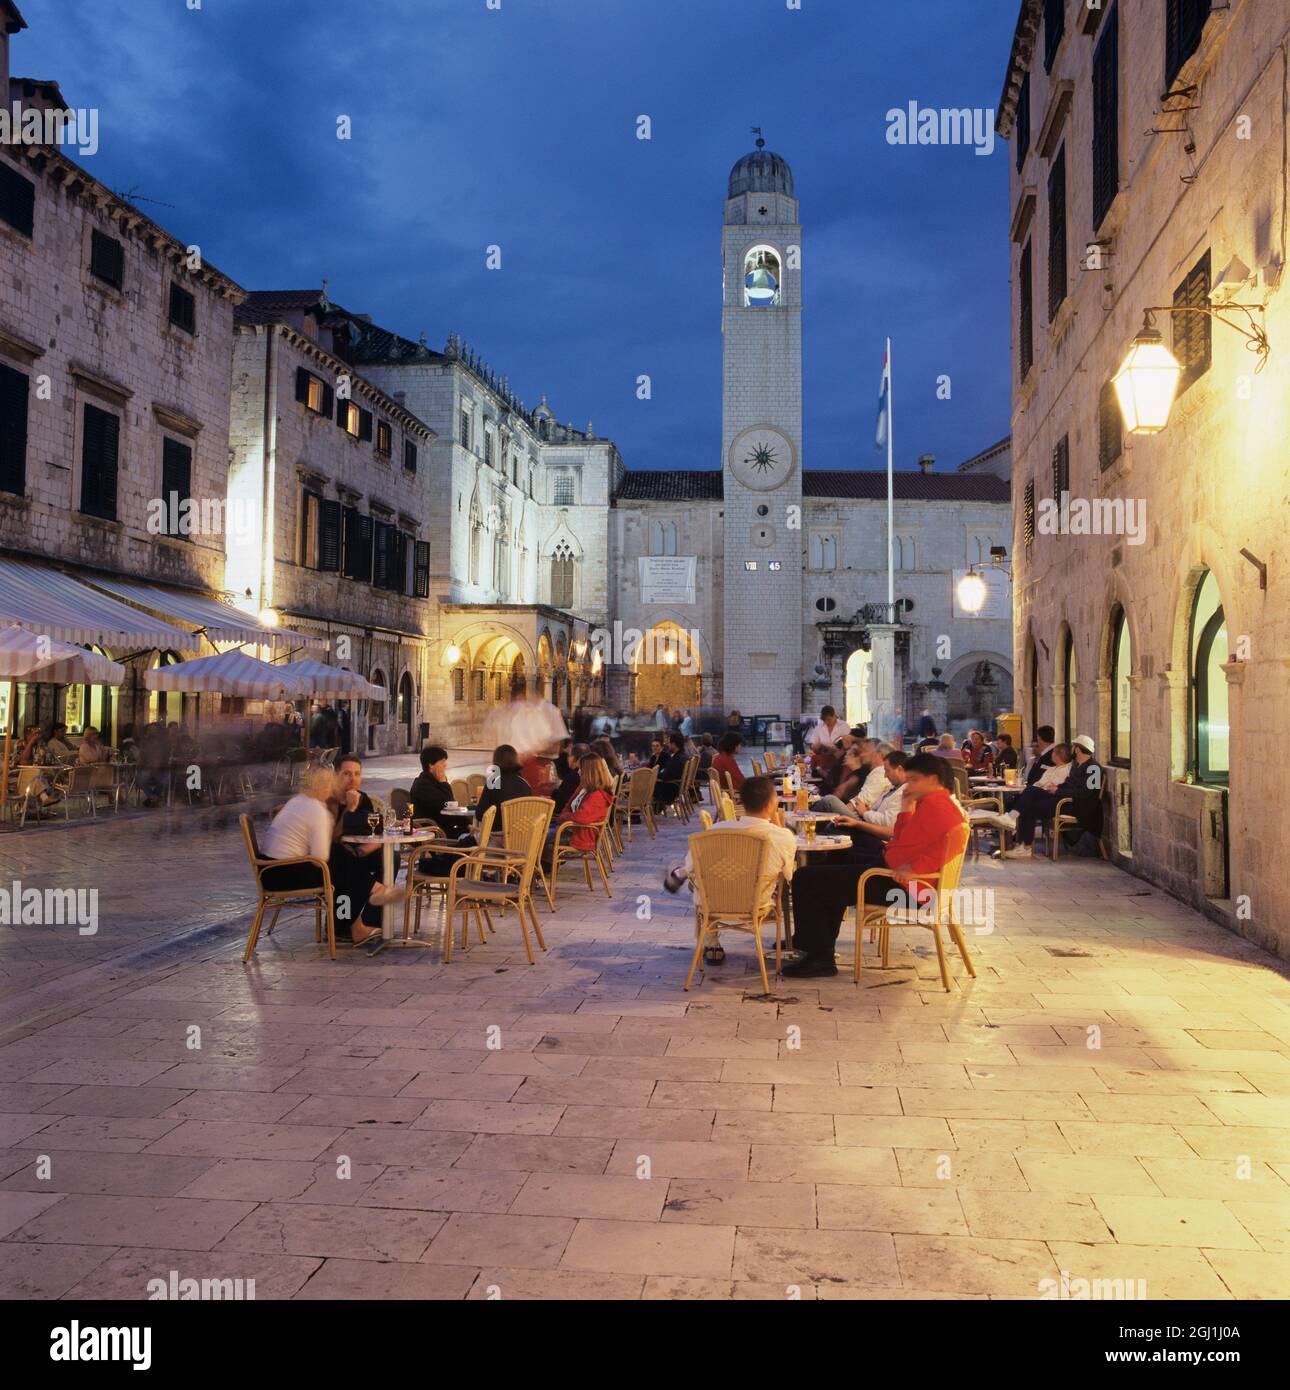 Cafes in the evening in the old town, Dubrovnik, Dalmatia, Croatia Stock Photo